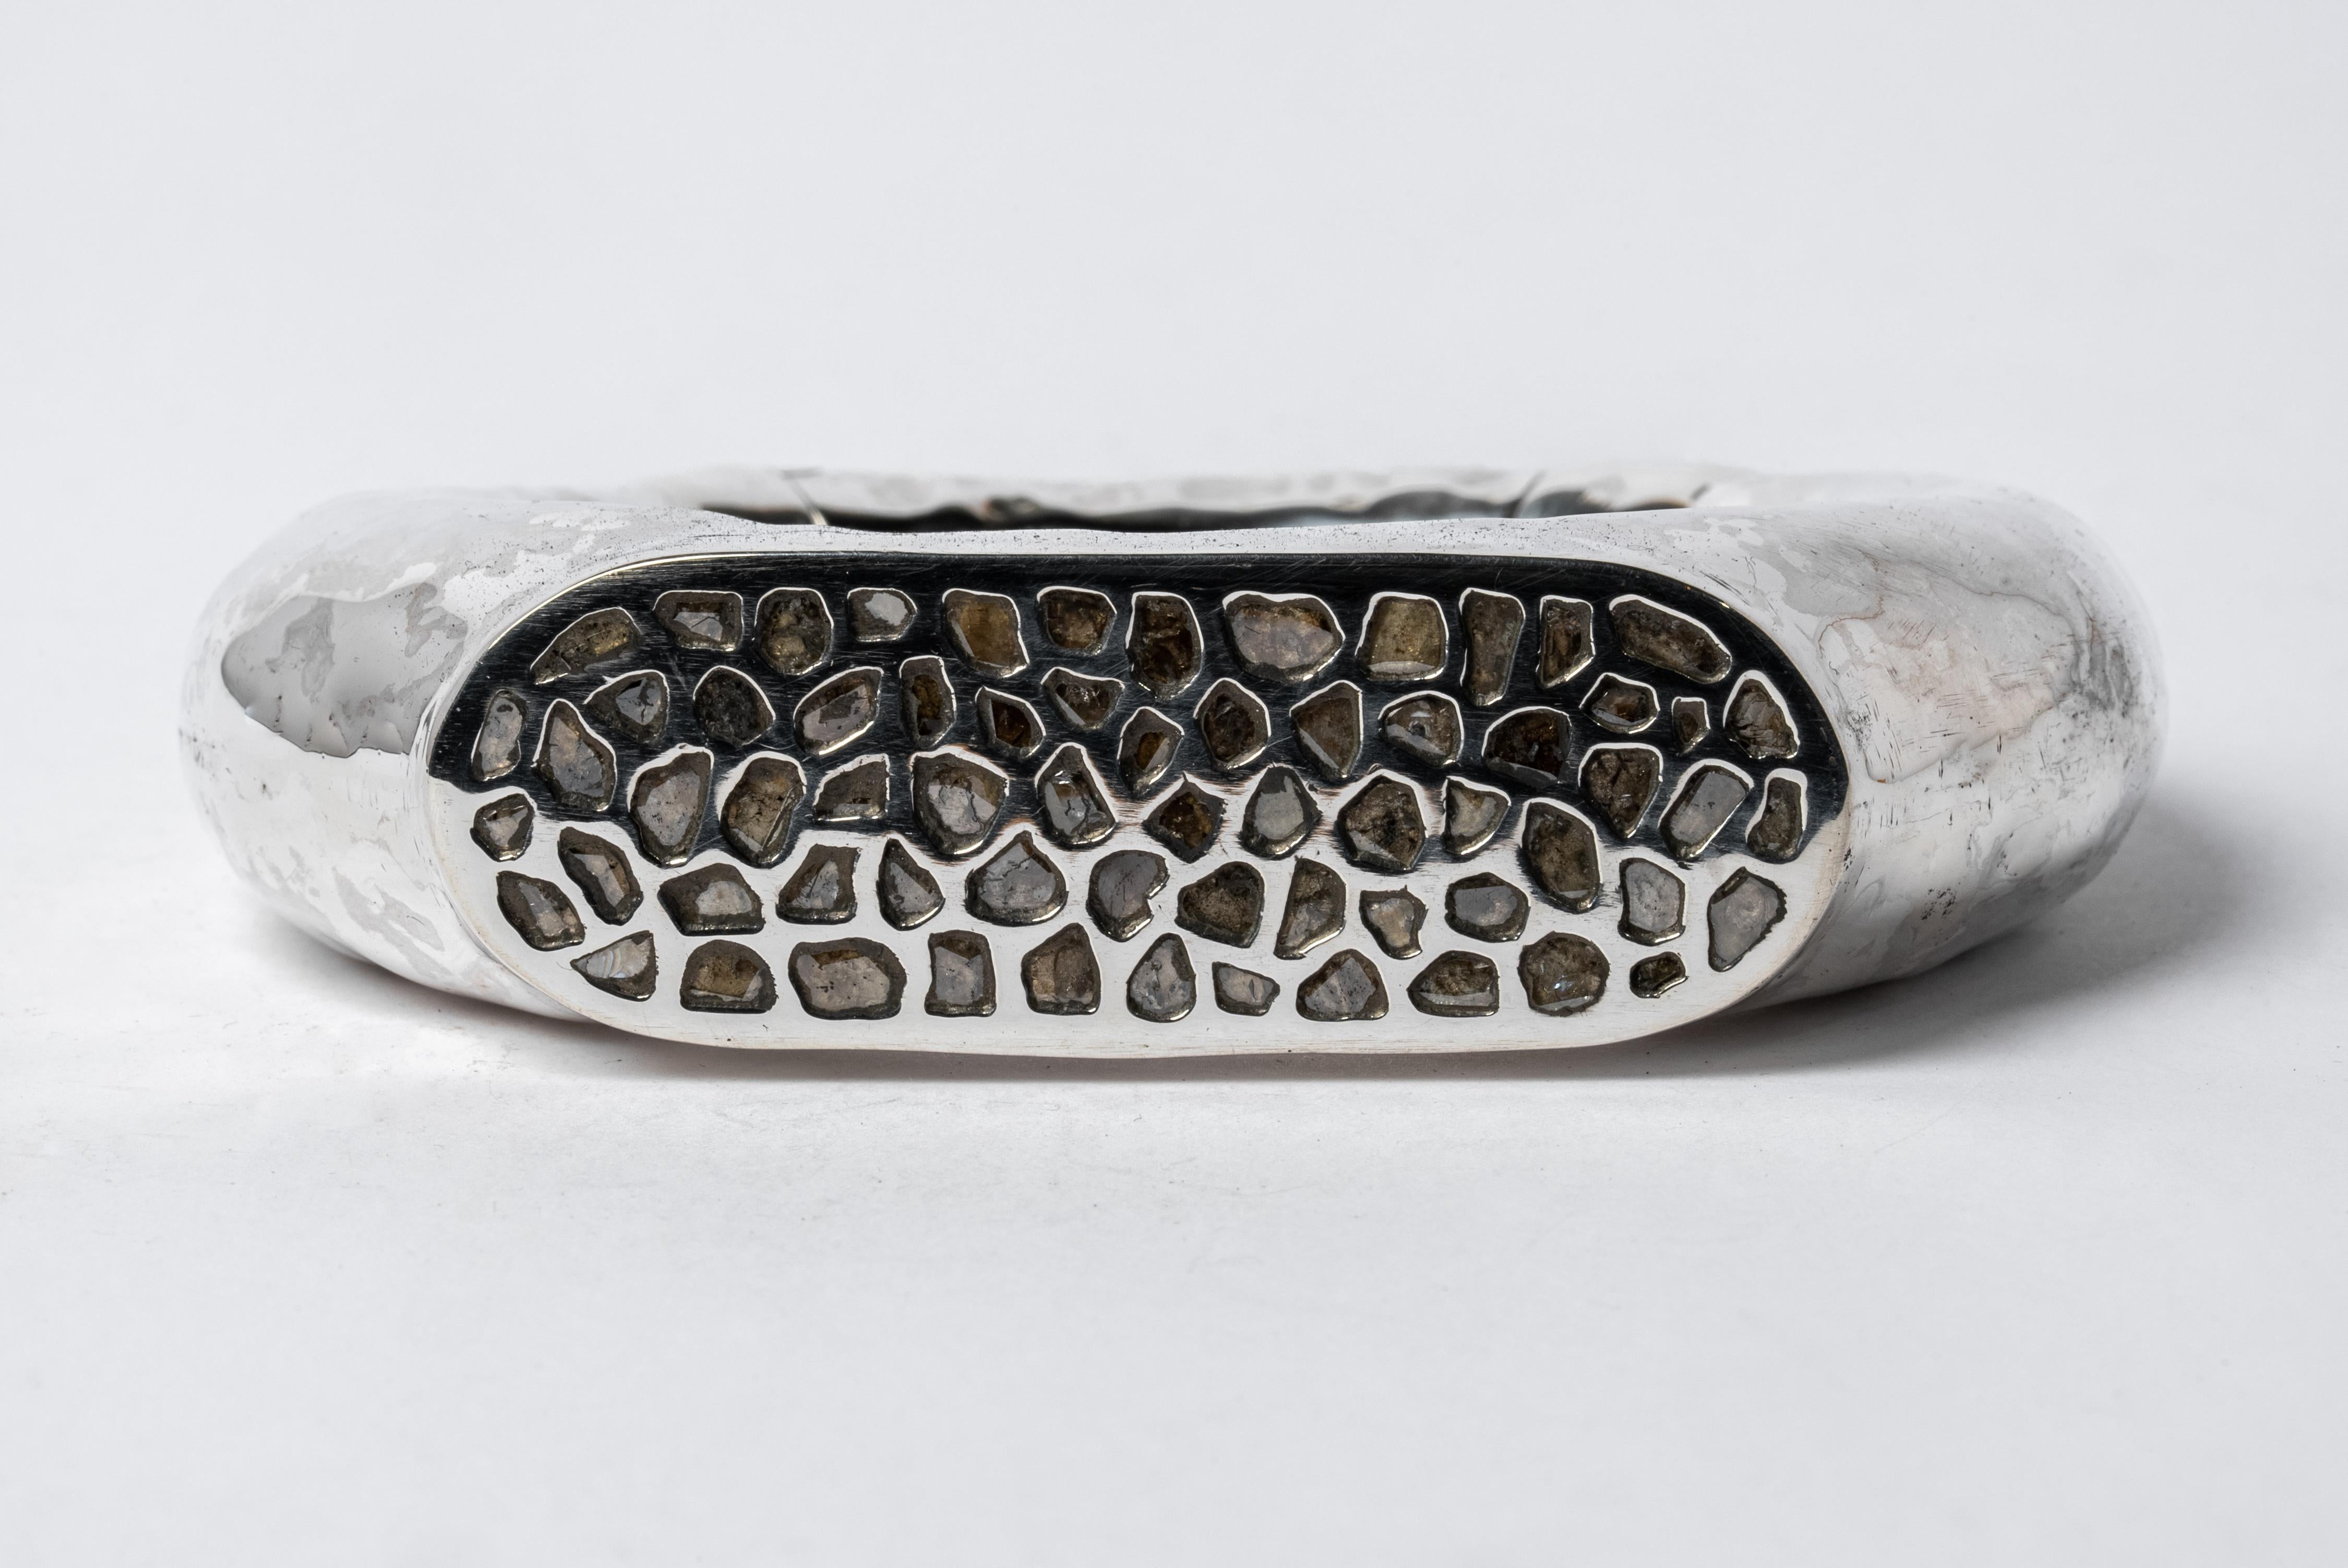 Bracelet in sterling silver and slabs of rough diamond set in mega pave setting. These slabs are removed from a larger chunk of diamond. This piece is 100% hand fabricated from metal plate; cut into sections and soldered together to make the hollow